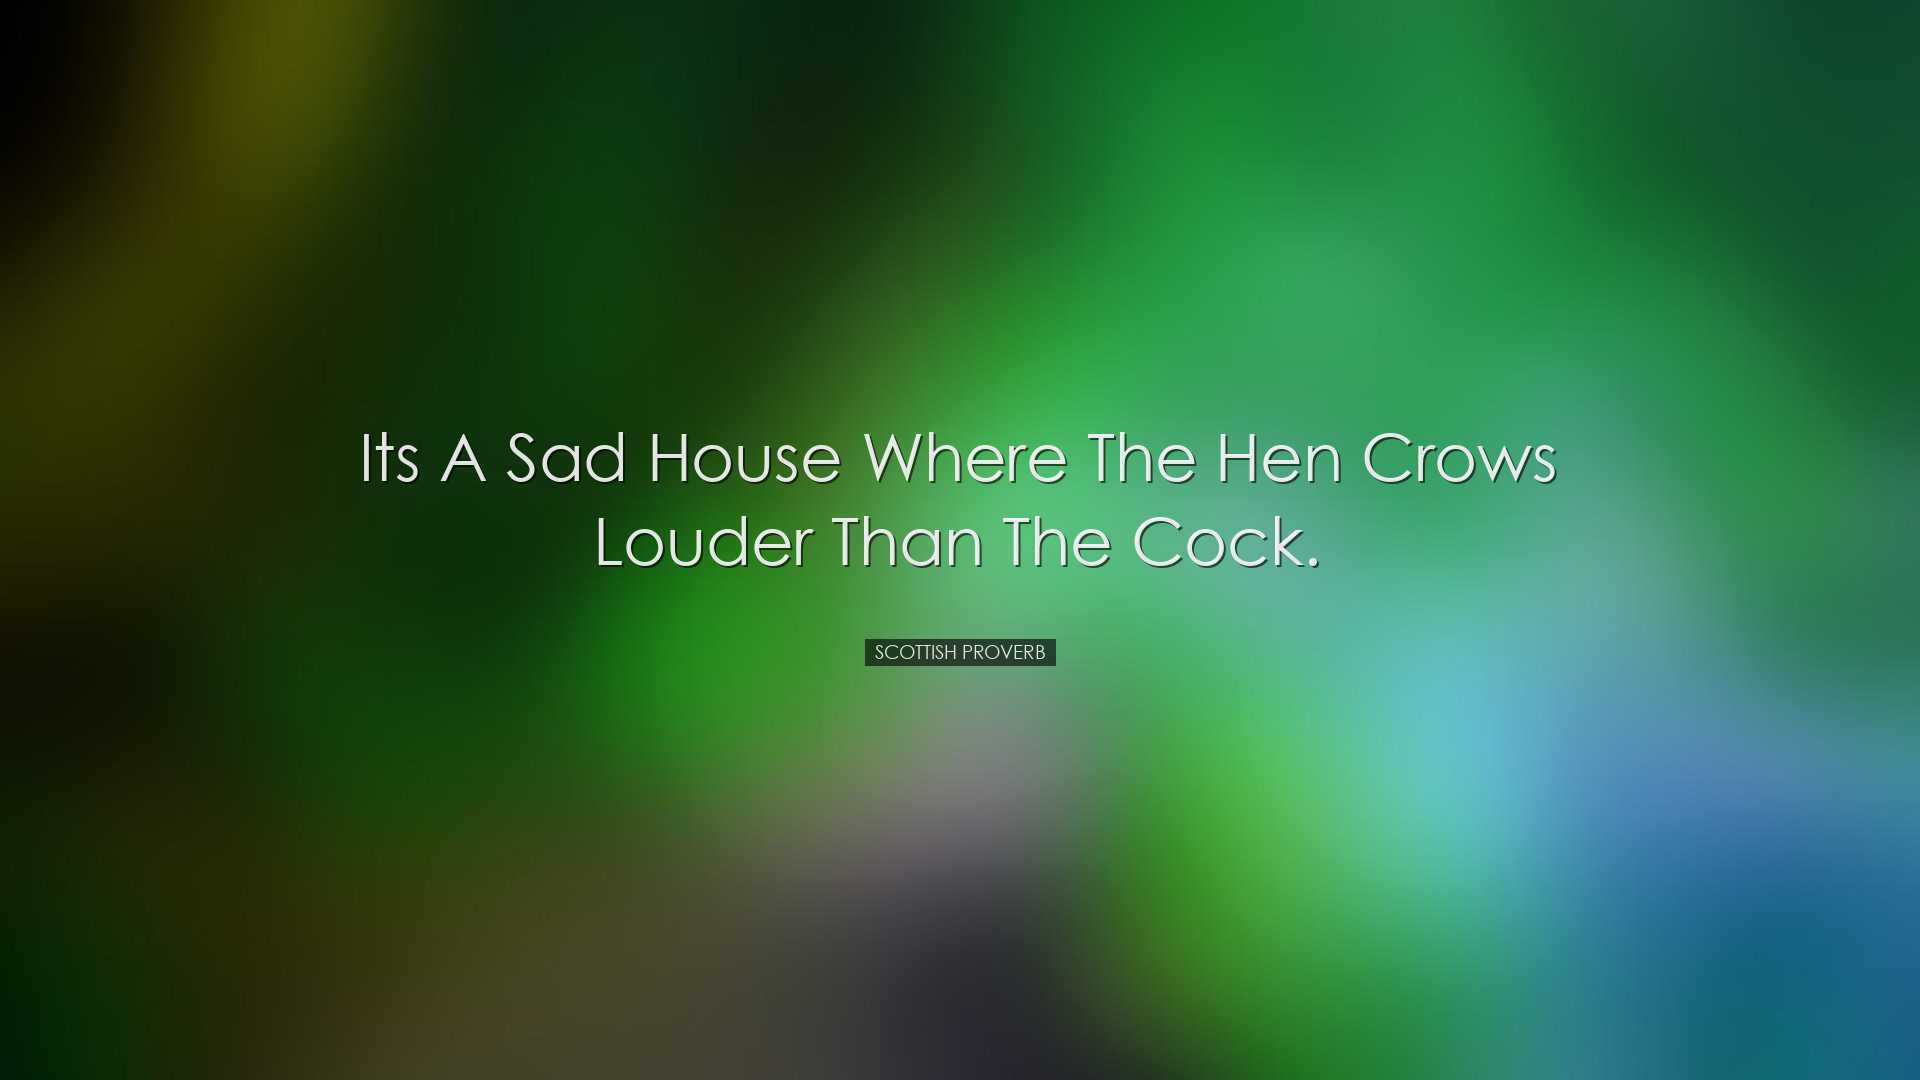 Its a sad house where the hen crows louder than the cock. - Scotti